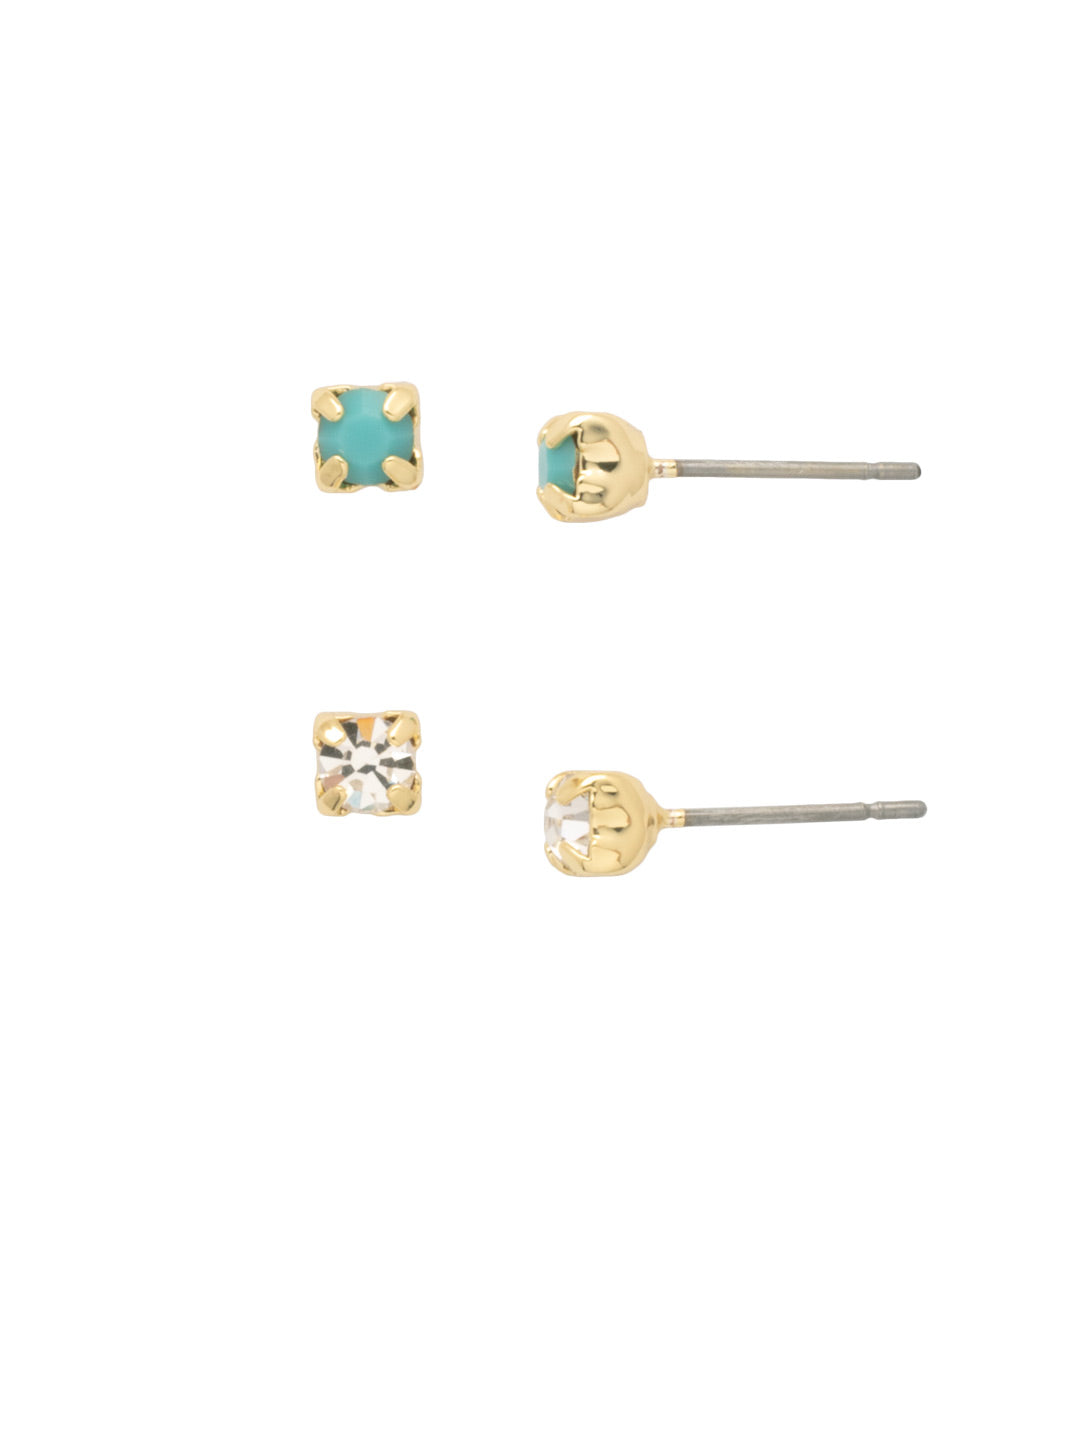 June Set Stud Earrings - EFM6BGSTO - <p>The June Set Stud Earrings feature two pairs of round-cut crystal studs. From Sorrelli's Santorini collection in our Bright Gold-tone finish.</p>